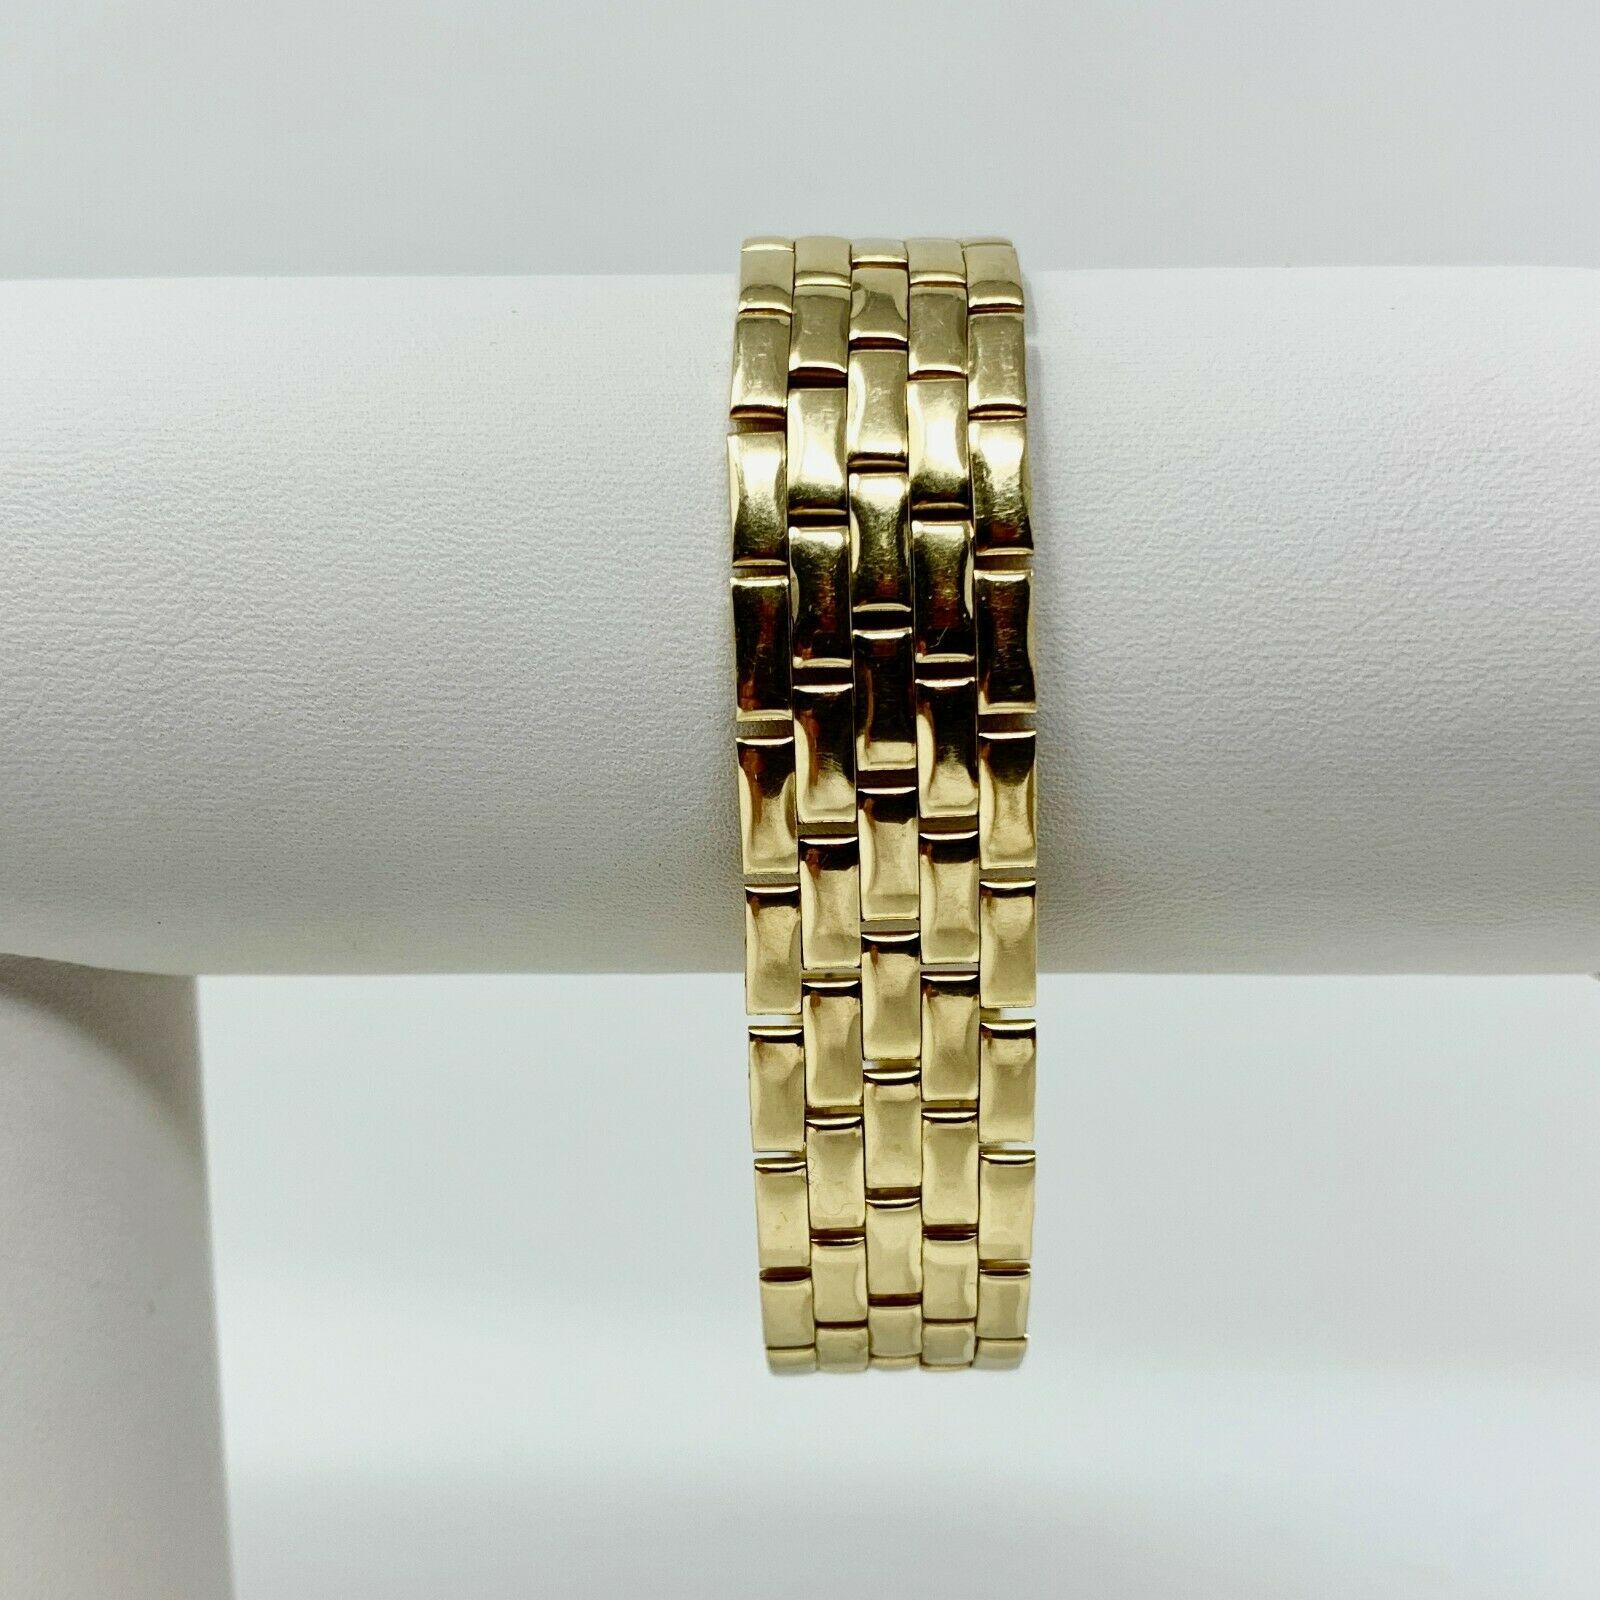 14k Yellow Gold 27.9g Panther Brick Style 15mm Link Bracelet Italy 7 Inches

Condition:  Excellent (Professionally Cleaned and Polished)
Metal:  14k Gold (Marked, and Professionally Tested)
Weight:  27.9g
Length:  7 Inches
Width:  15mm
Closure:  Box